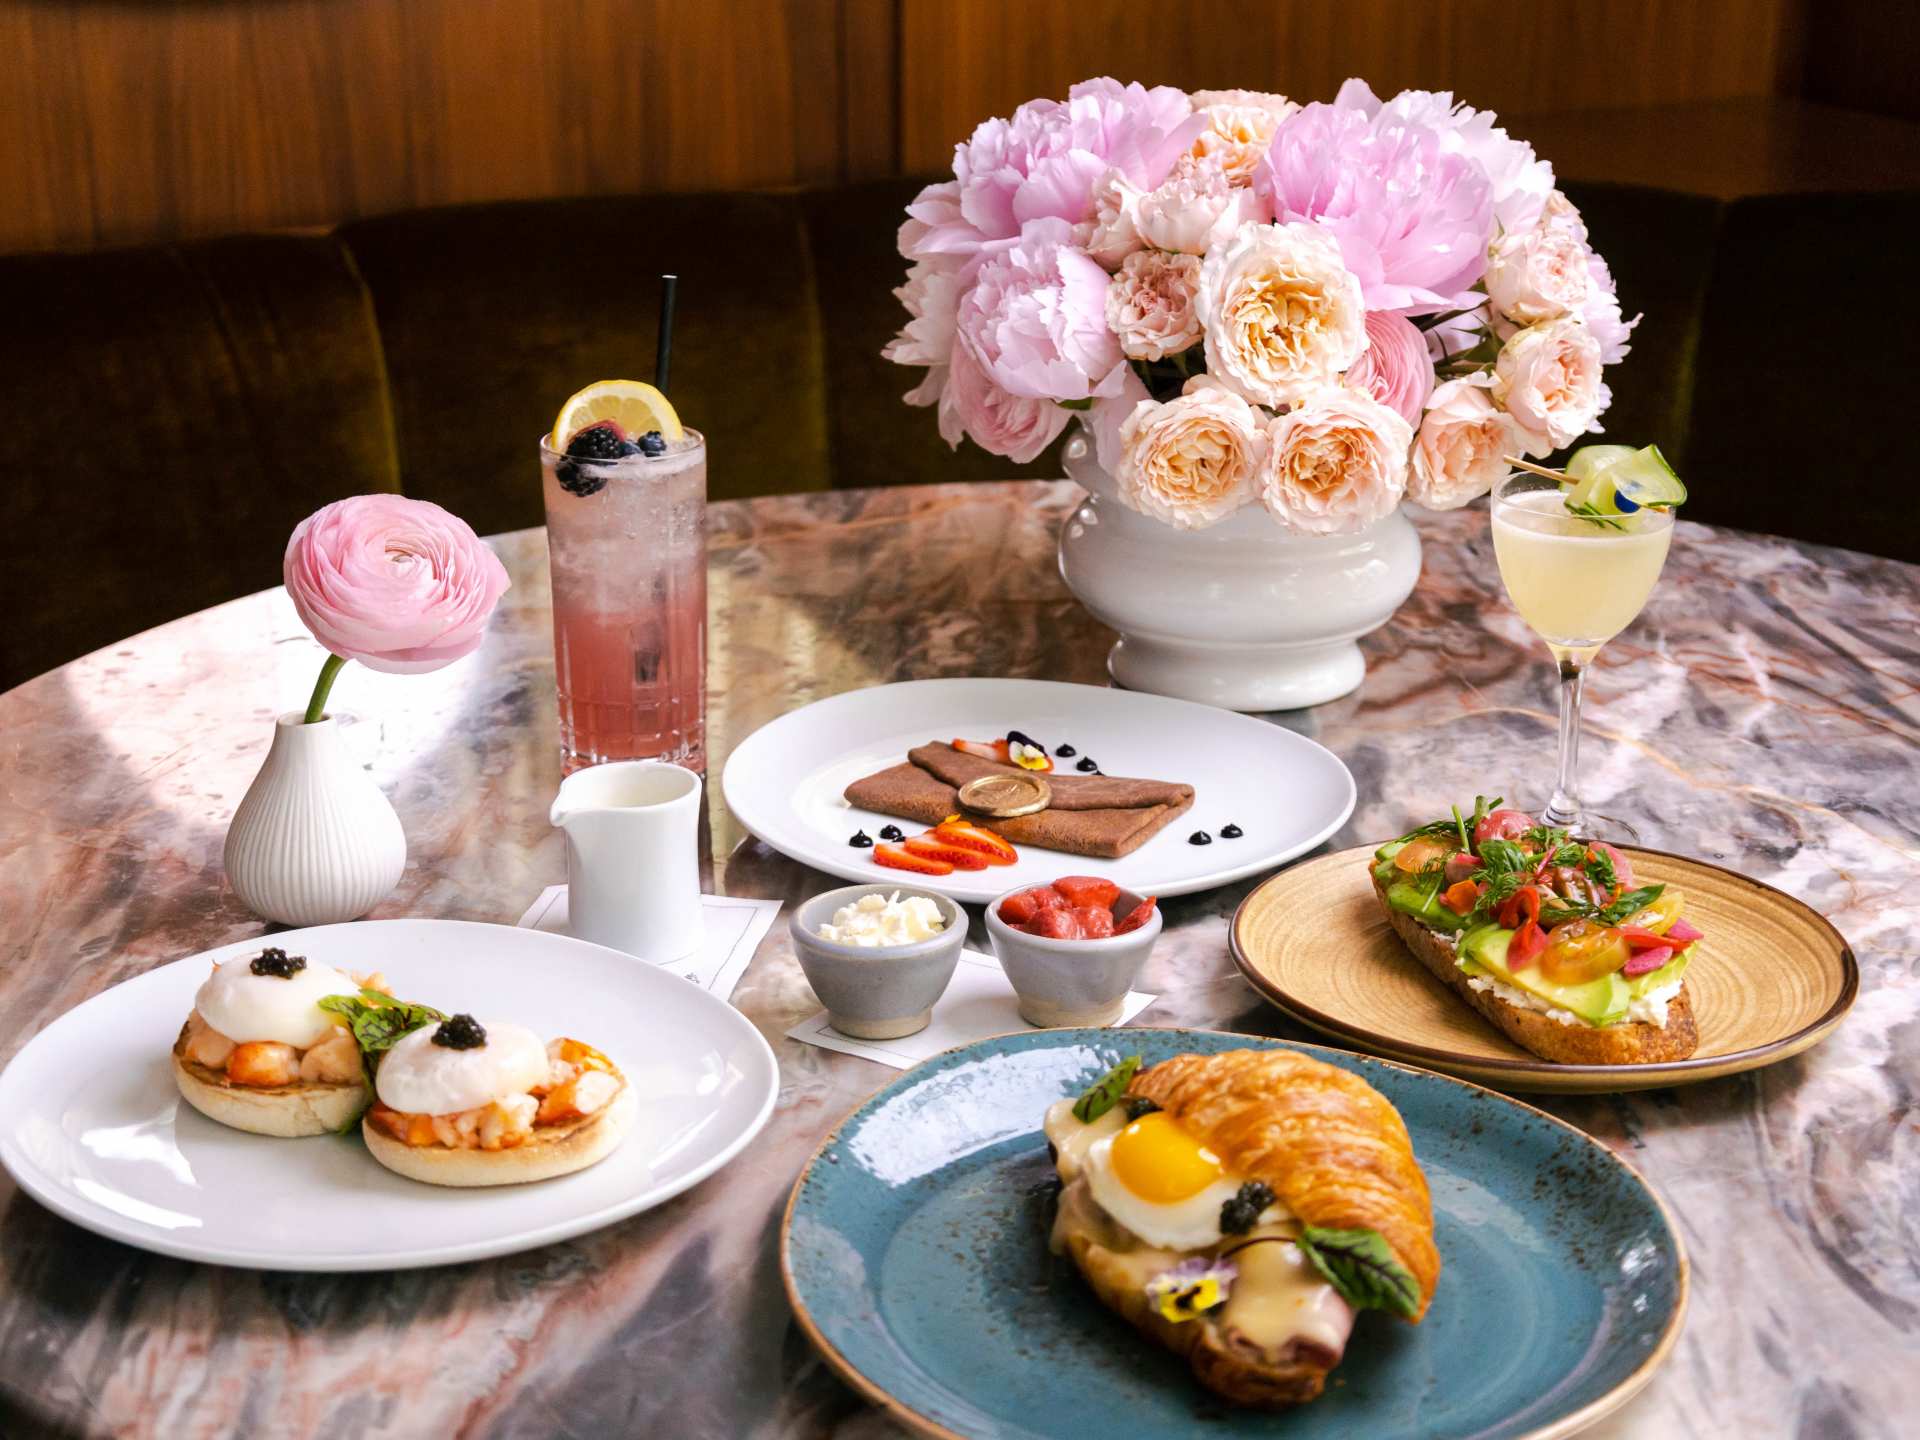 Mother's Day ideas | Brunch dishes at dbar at the Four Seasons